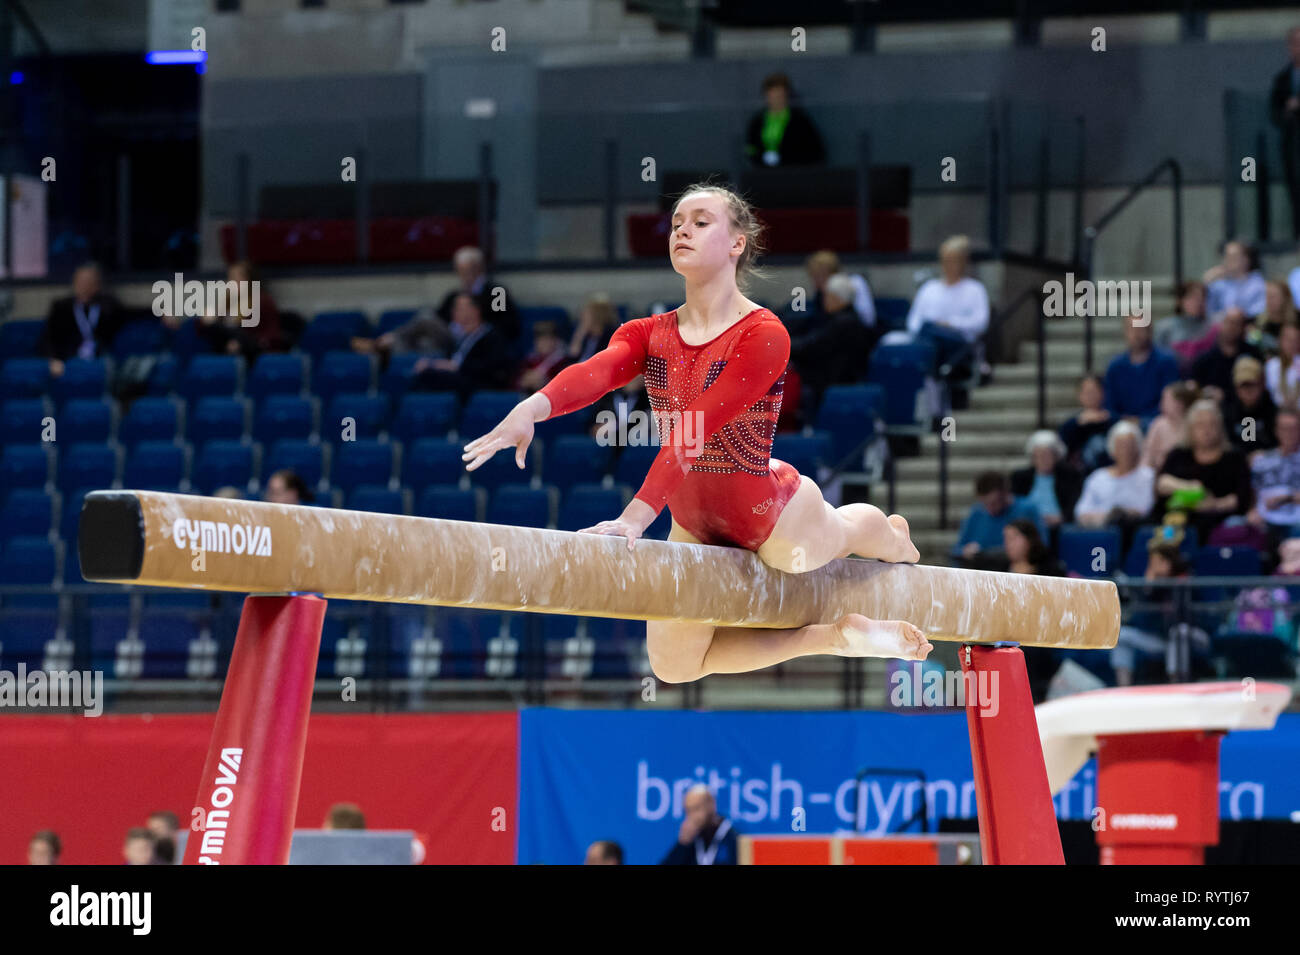 Liverpool, UK. 15th Mar, 2019. Kitty Scholes-Pryce of Park Wrekin School of Gymnastics competing during the beam rotation at the Men's and Women's Artistic British Championships 2019, M&S Bank Arena, Liverpool, UK. Credit: Iain Scott Photography/Alamy Live News Stock Photo